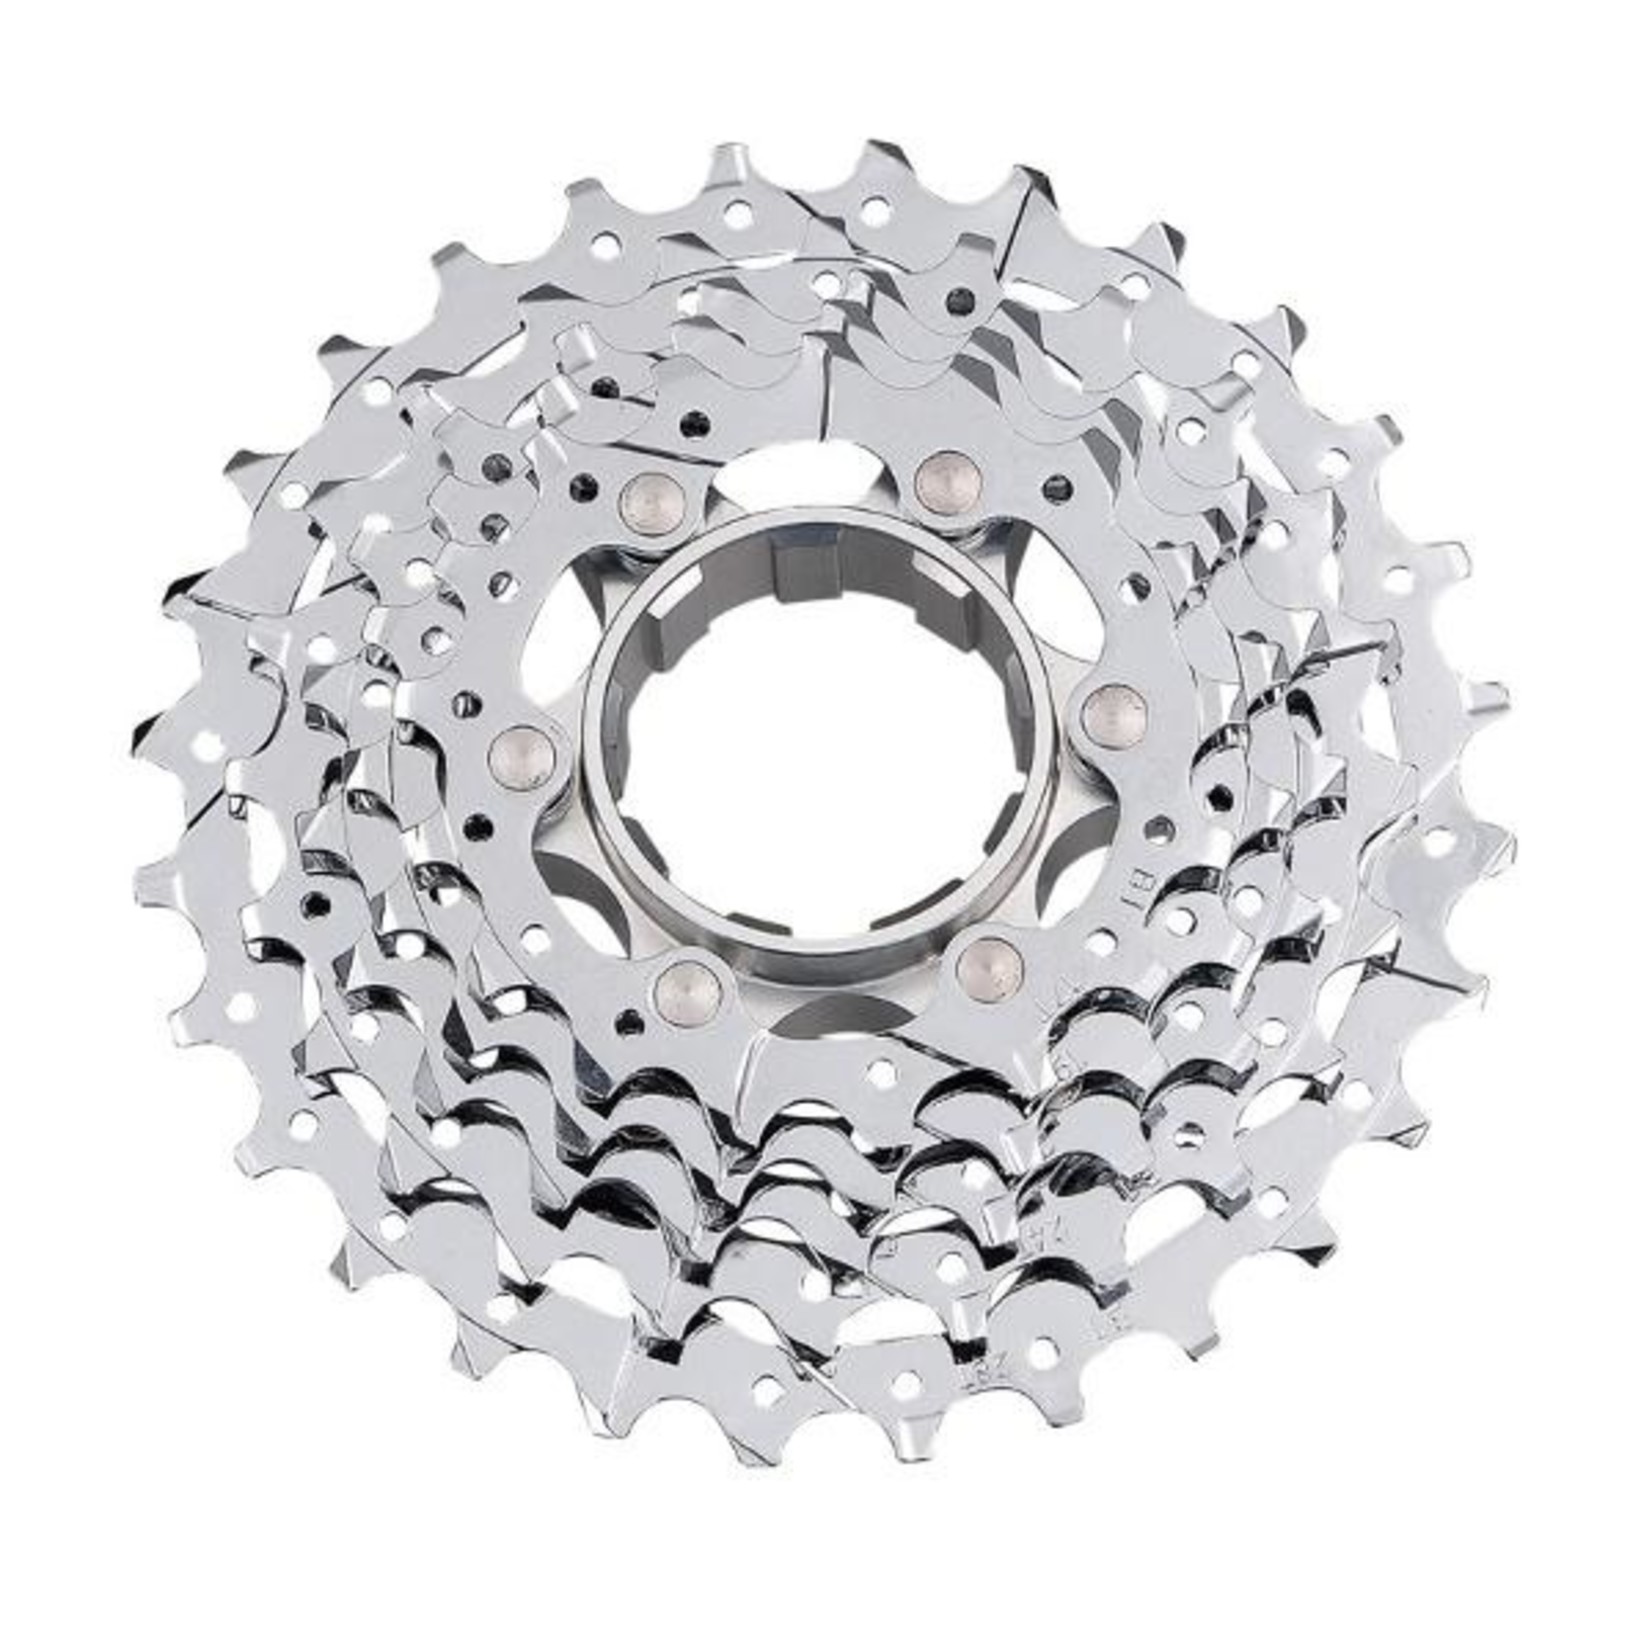 Microshift Microshift Bicycle Cassette - 10 Speed - 11-25T - Chrome Plated